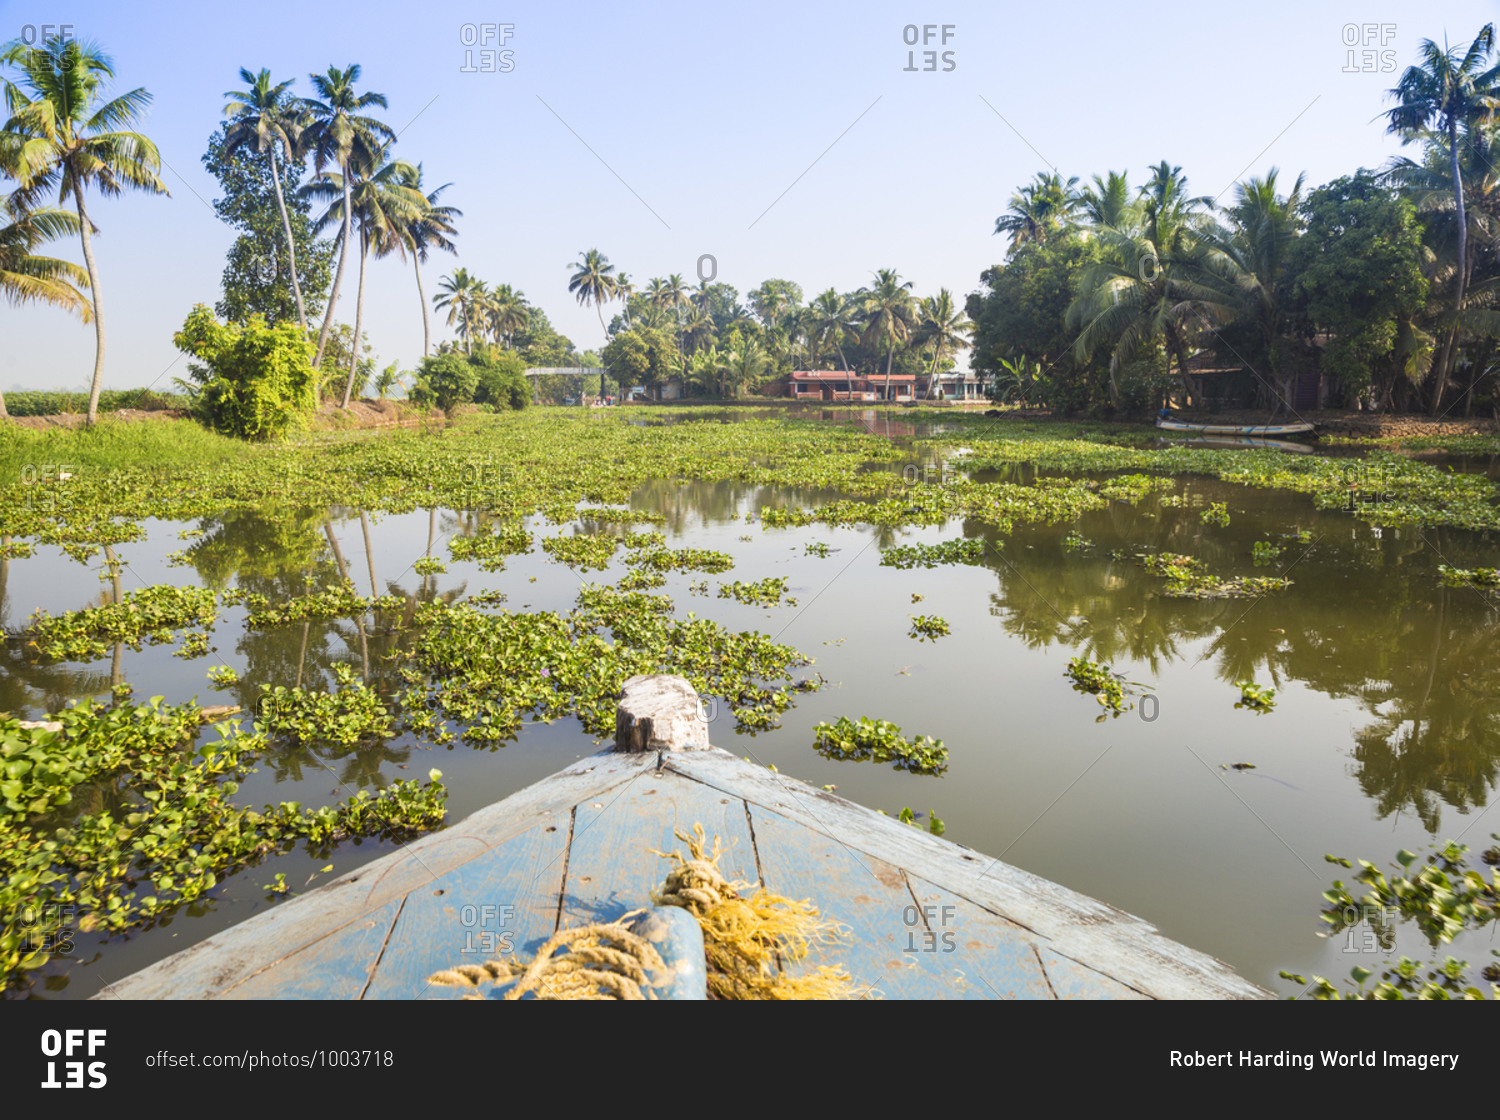 Backwaters, Alappuzha (Alleppey), Kerala, India, Asia